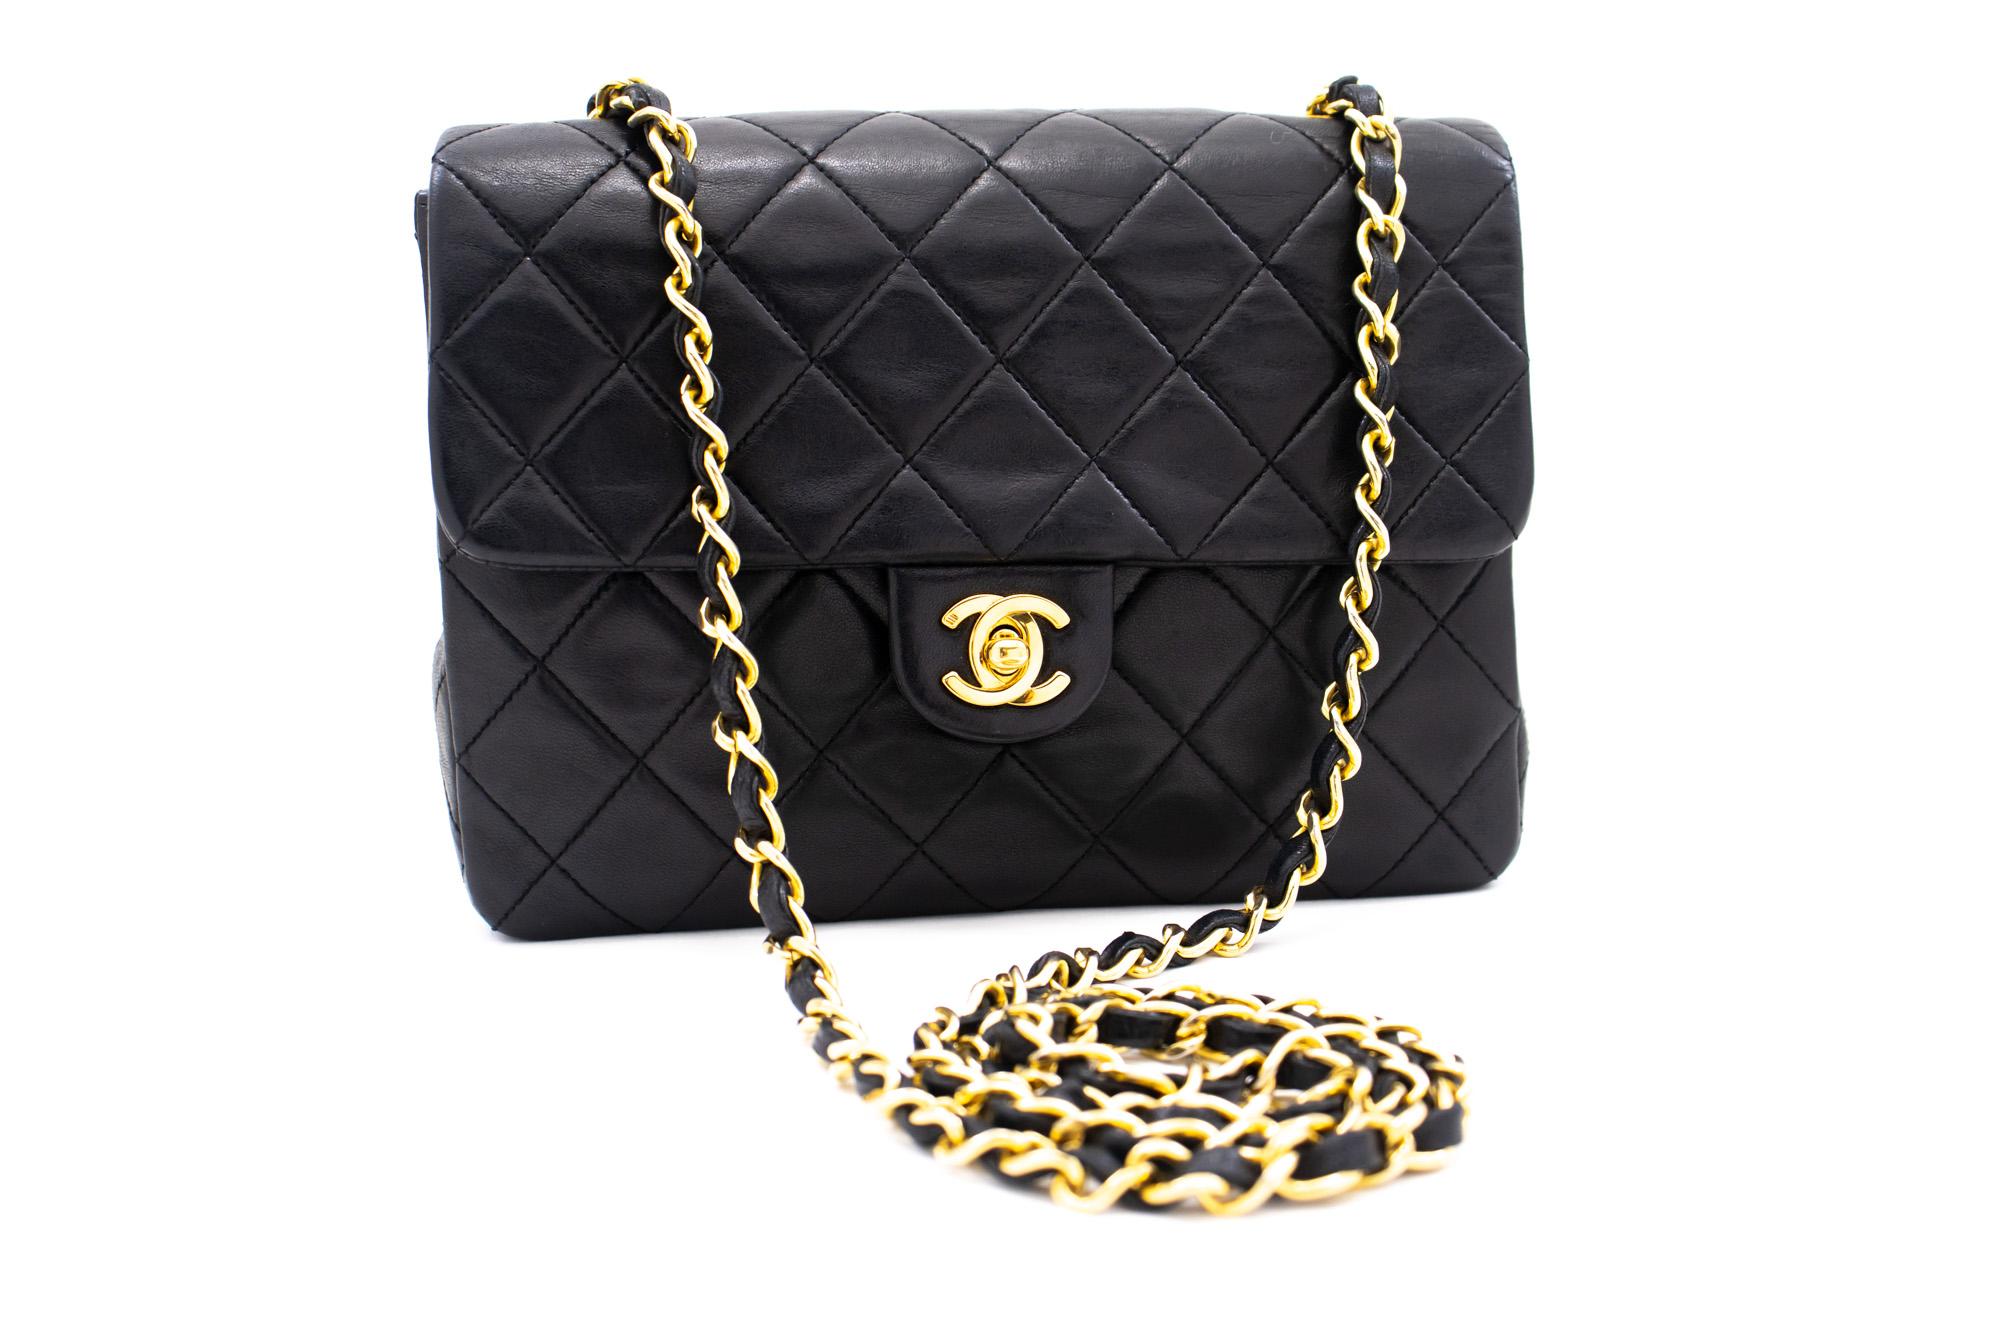 An authentic CHANEL Mini Square Small Chain Shoulder Bag Crossbody Black Quilt. The color is Black. The outside material is Leather. The pattern is Solid. This item is Vintage / Classic. The year of manufacture would be 1989-1991.
Conditions &